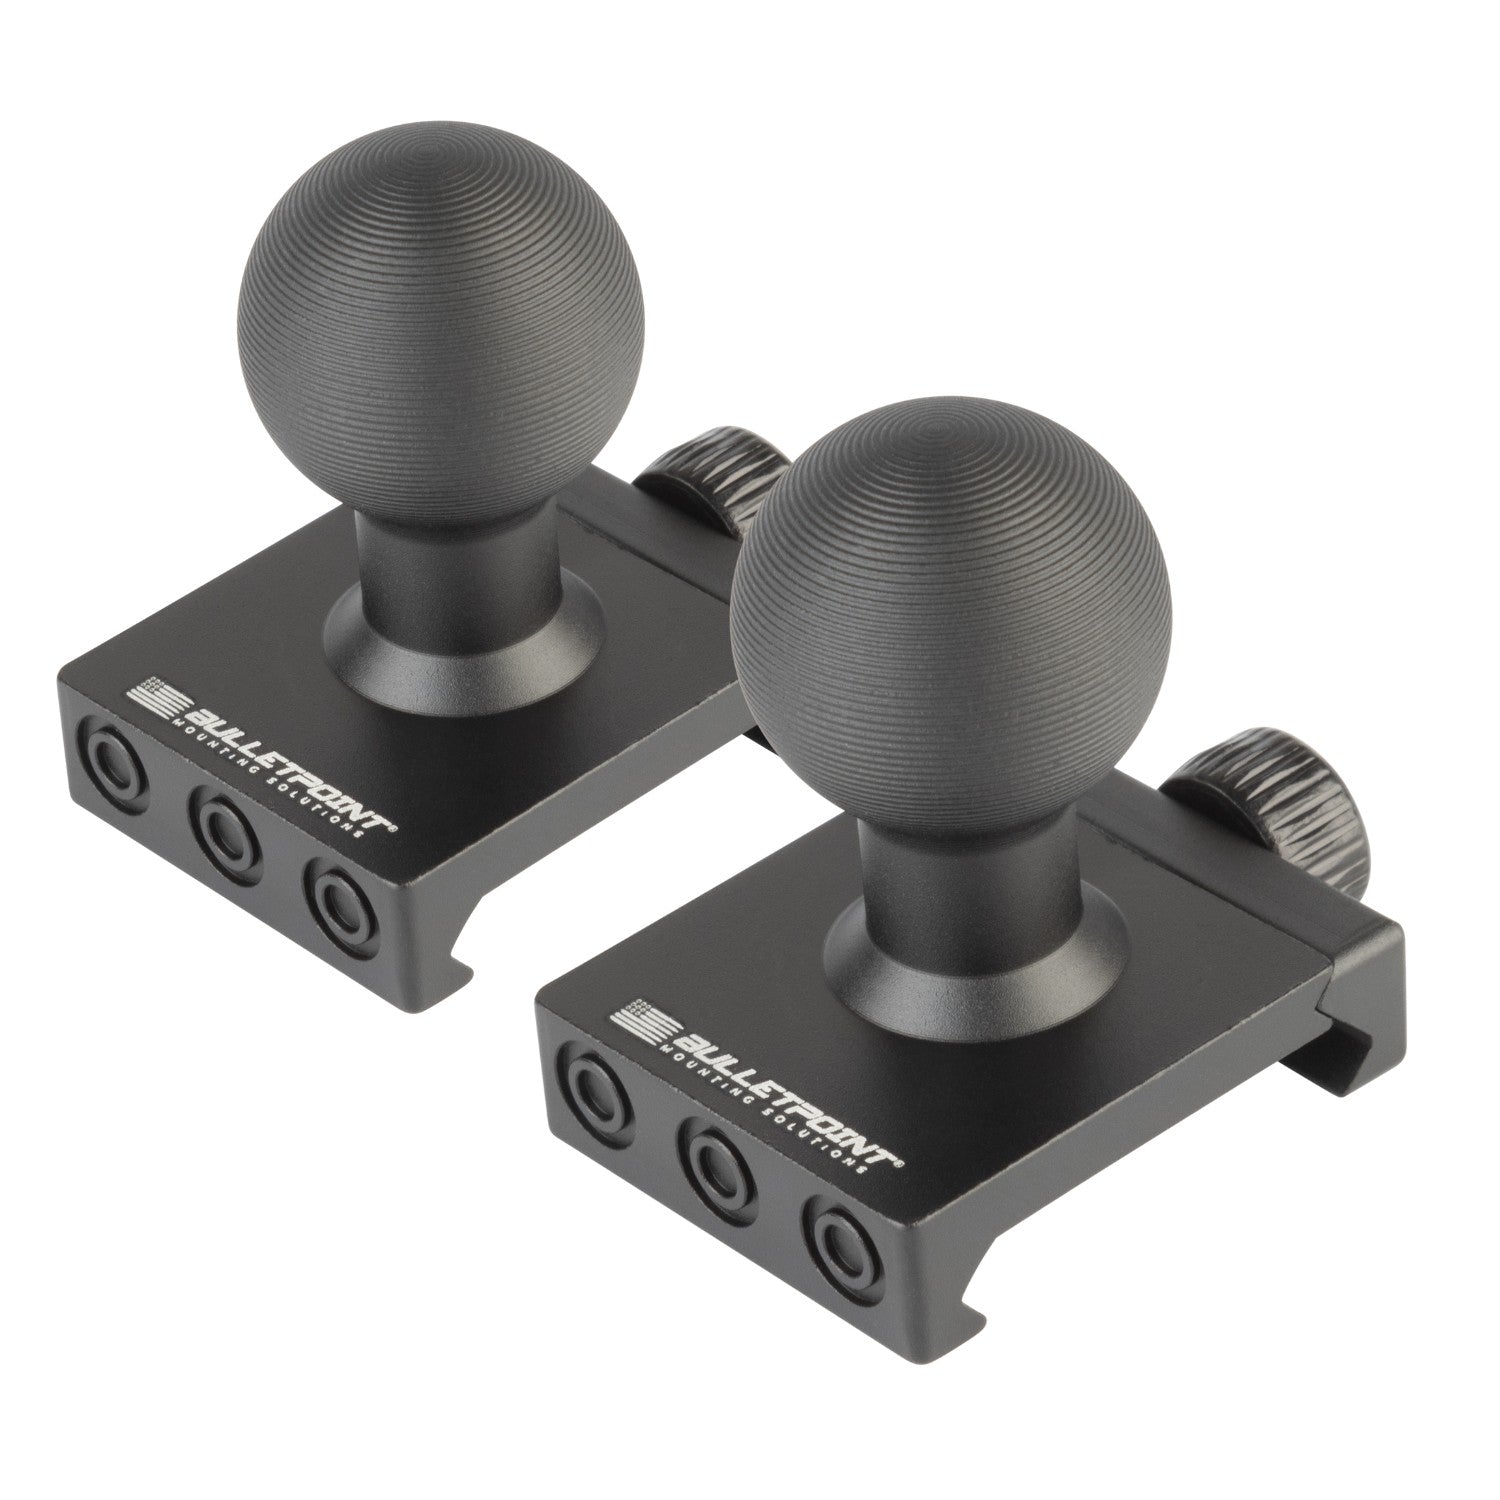 20mm Mounting Ball compatible with Picatinny-Style Rails